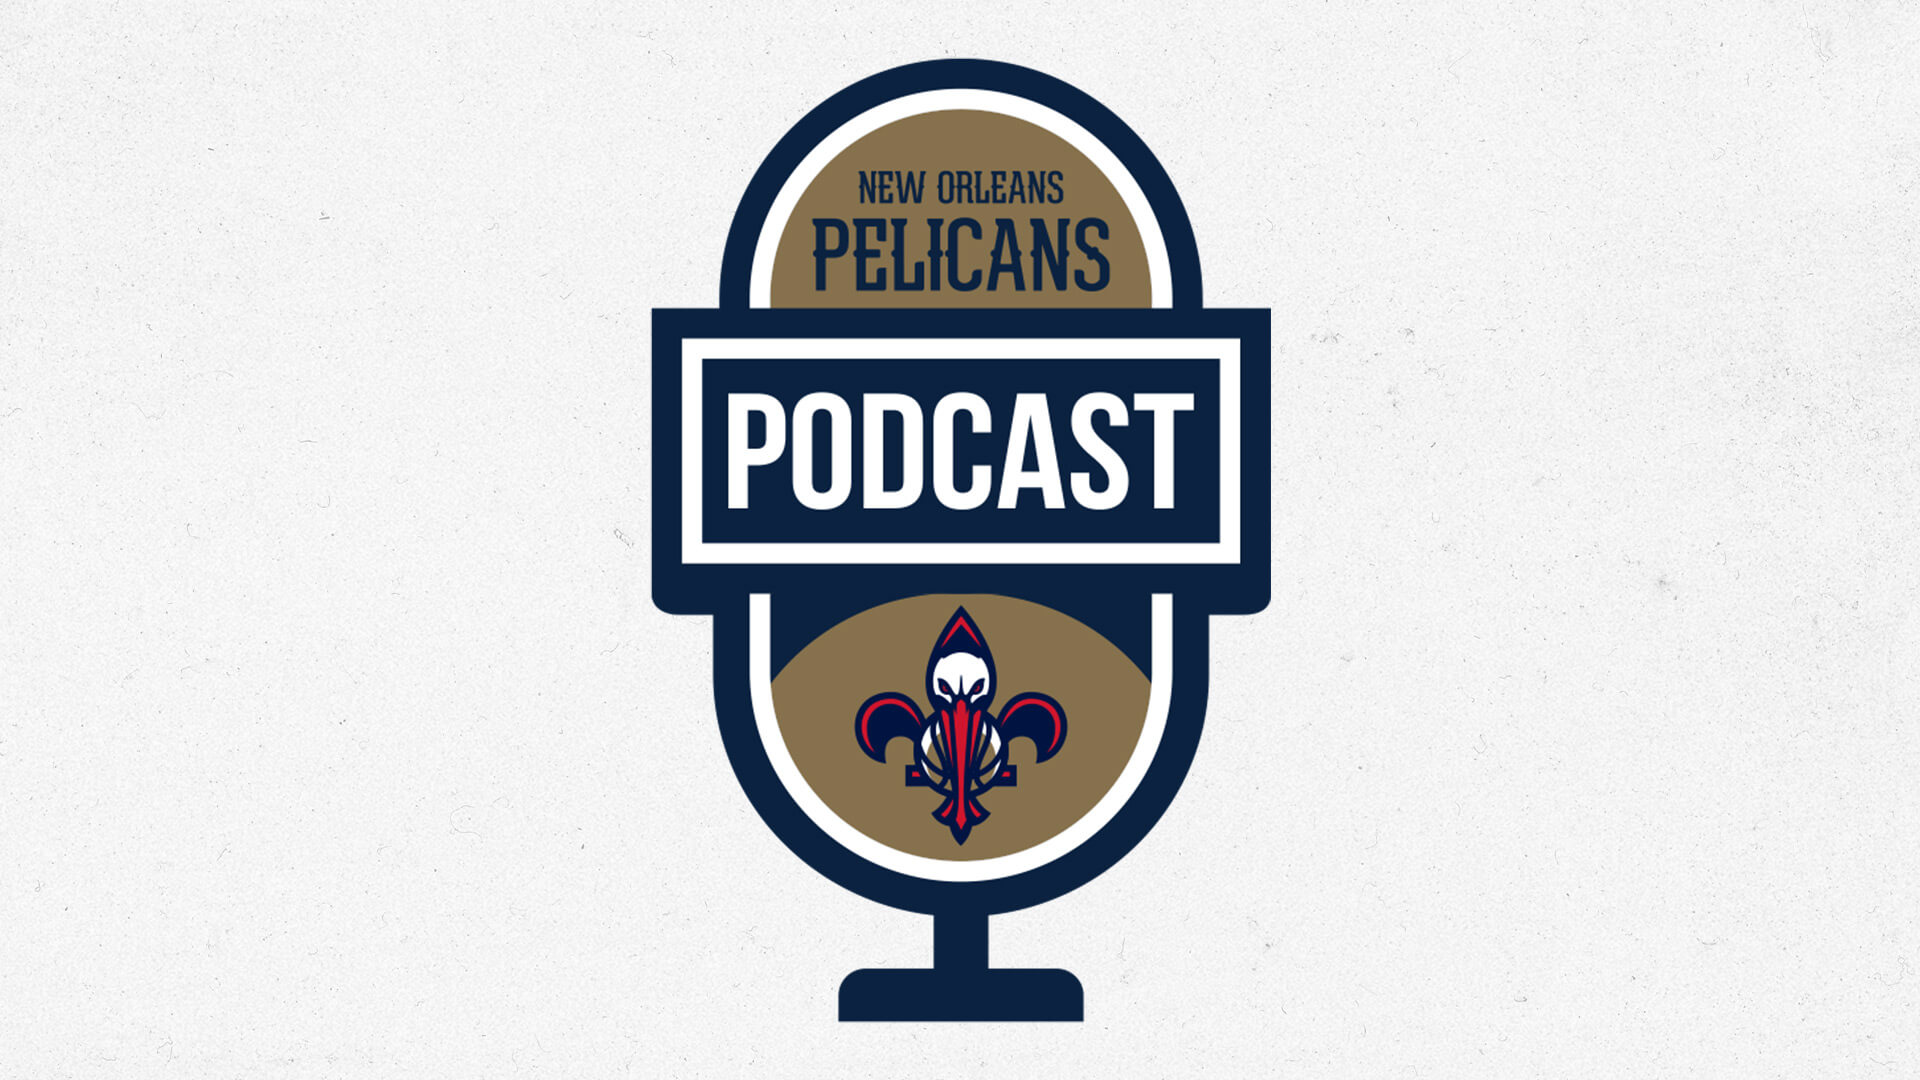 John DeShazier on loss to Nuggets, LeBron James and NBA scoring record | Pelicans Podcast